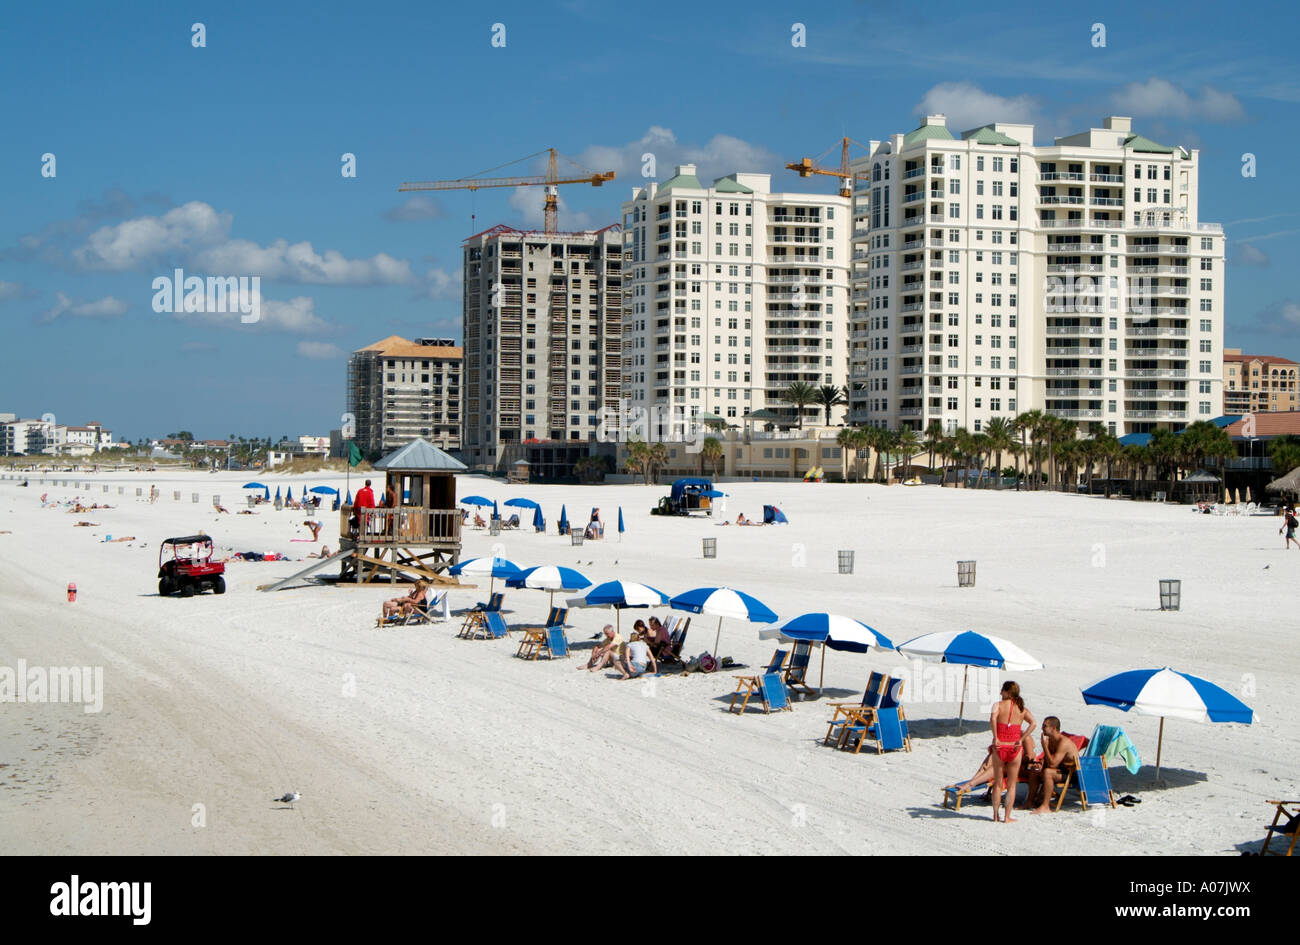 Clearwater Beach on the Gulf Coast Florida USA. Highrise hotel and apartment blocks. Stock Photo